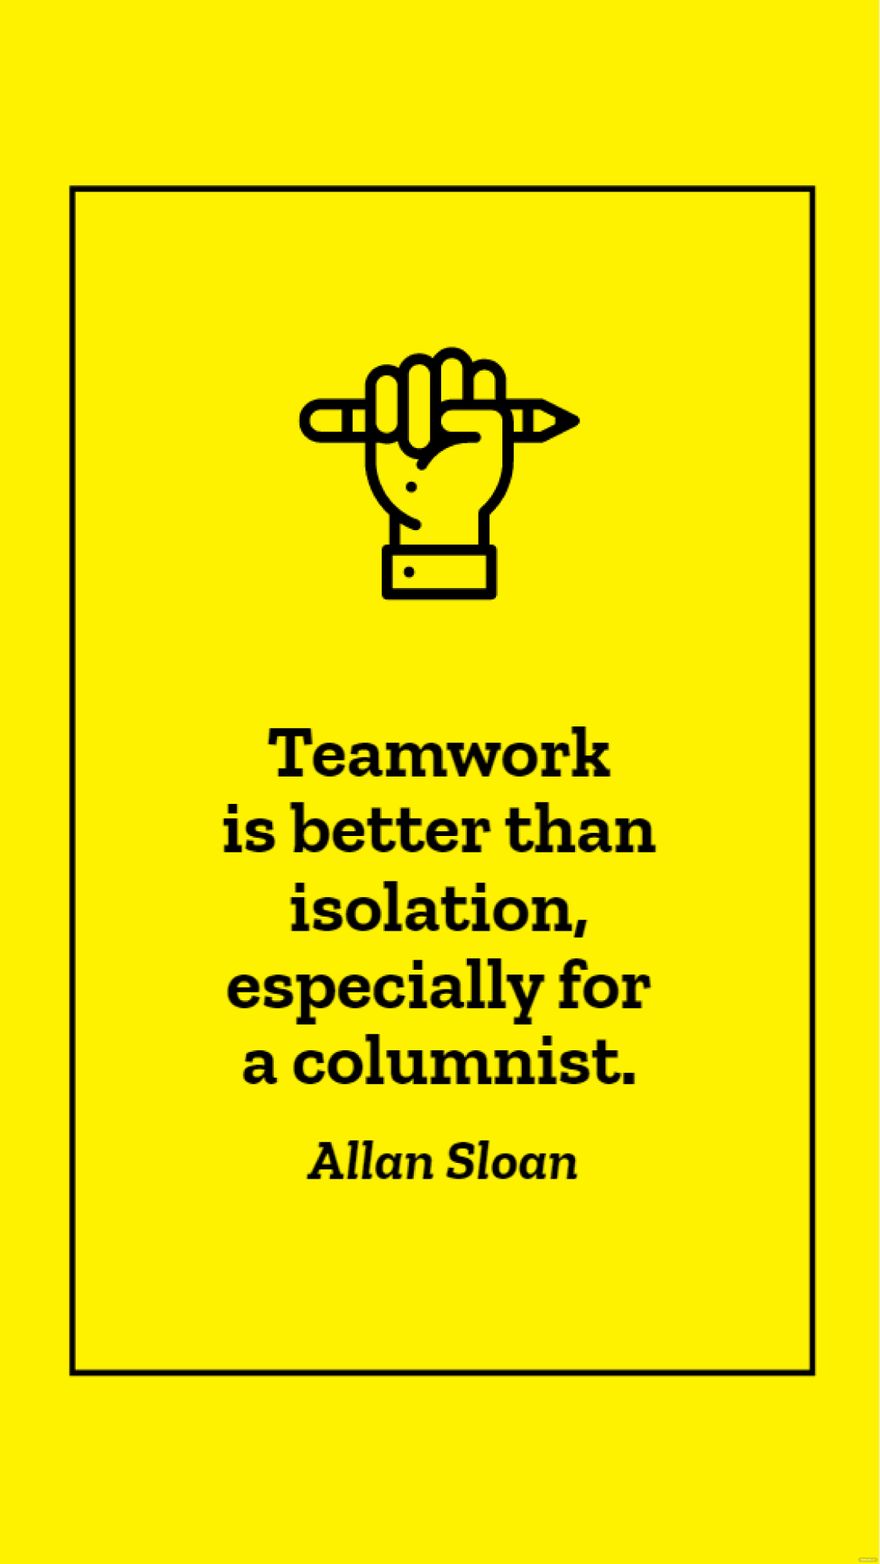 Allan Sloan - Teamwork is better than isolation, especially for a columnist.